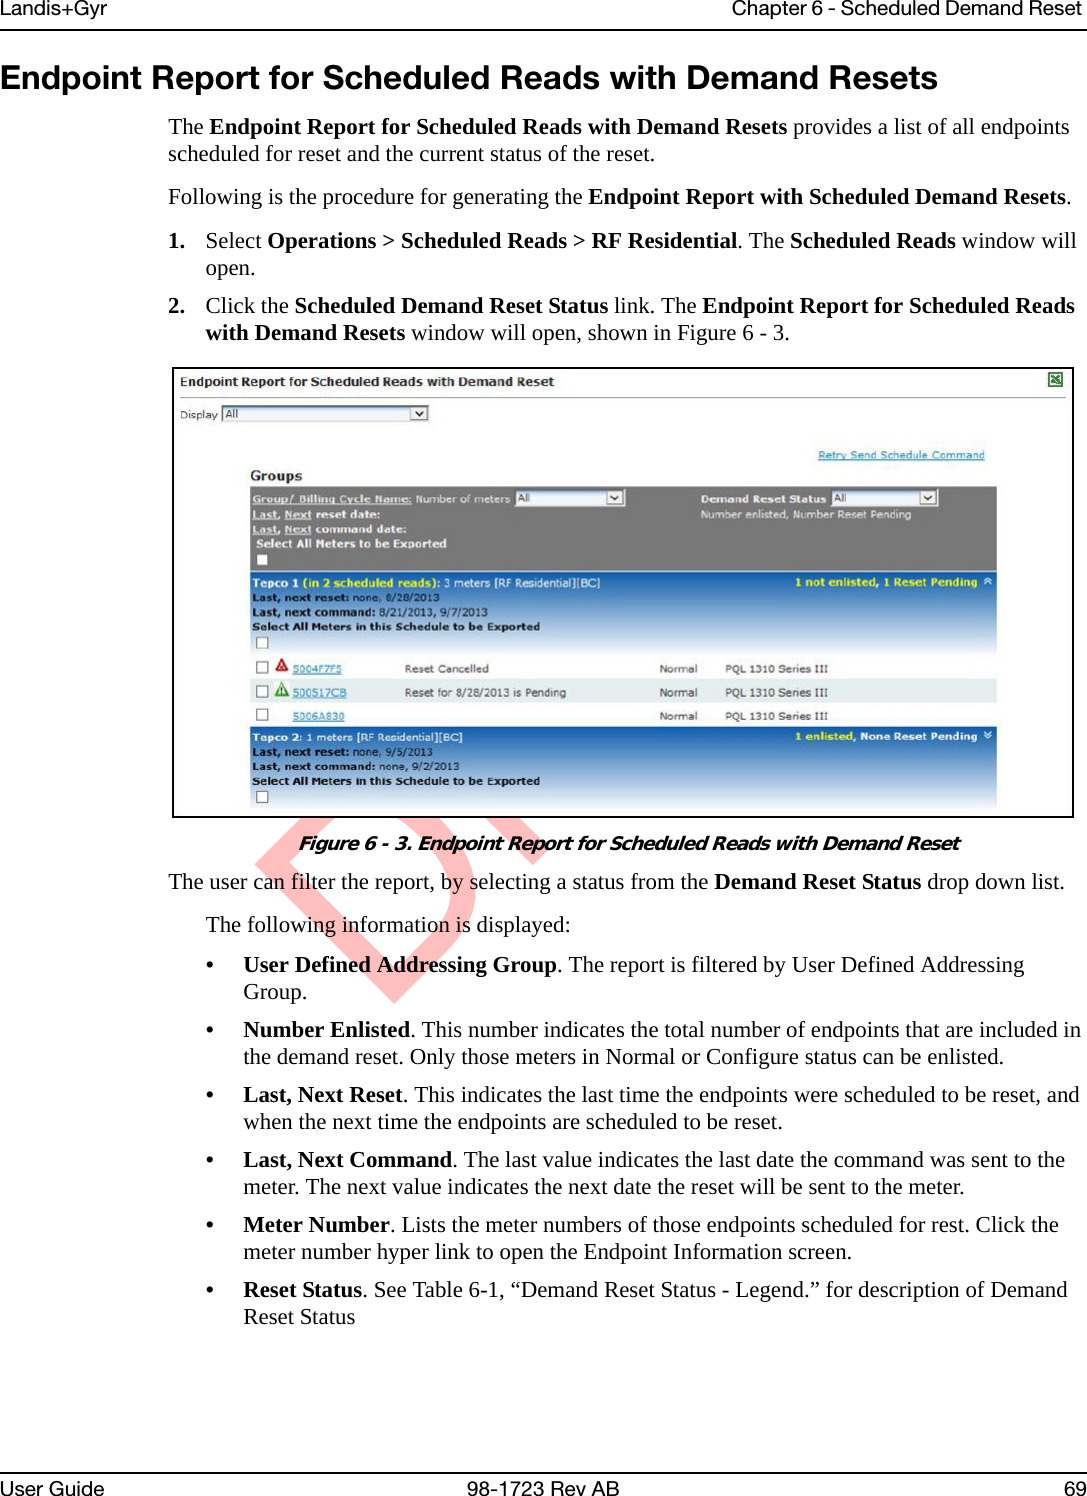 DraftLandis+Gyr Chapter 6 - Scheduled Demand Reset User Guide 98-1723 Rev AB 69Endpoint Report for Scheduled Reads with Demand ResetsThe Endpoint Report for Scheduled Reads with Demand Resets provides a list of all endpoints scheduled for reset and the current status of the reset. Following is the procedure for generating the Endpoint Report with Scheduled Demand Resets.1. Select Operations &gt; Scheduled Reads &gt; RF Residential. The Scheduled Reads window will open.2. Click the Scheduled Demand Reset Status link. The Endpoint Report for Scheduled Reads with Demand Resets window will open, shown in Figure 6 - 3.Figure 6 - 3. Endpoint Report for Scheduled Reads with Demand ResetThe user can filter the report, by selecting a status from the Demand Reset Status drop down list.The following information is displayed:• User Defined Addressing Group. The report is filtered by User Defined Addressing Group.• Number Enlisted. This number indicates the total number of endpoints that are included in the demand reset. Only those meters in Normal or Configure status can be enlisted.• Last, Next Reset. This indicates the last time the endpoints were scheduled to be reset, and when the next time the endpoints are scheduled to be reset.• Last, Next Command. The last value indicates the last date the command was sent to the meter. The next value indicates the next date the reset will be sent to the meter. • Meter Number. Lists the meter numbers of those endpoints scheduled for rest. Click the meter number hyper link to open the Endpoint Information screen.• Reset Status. See Table 6-1, “Demand Reset Status - Legend.” for description of Demand Reset Status